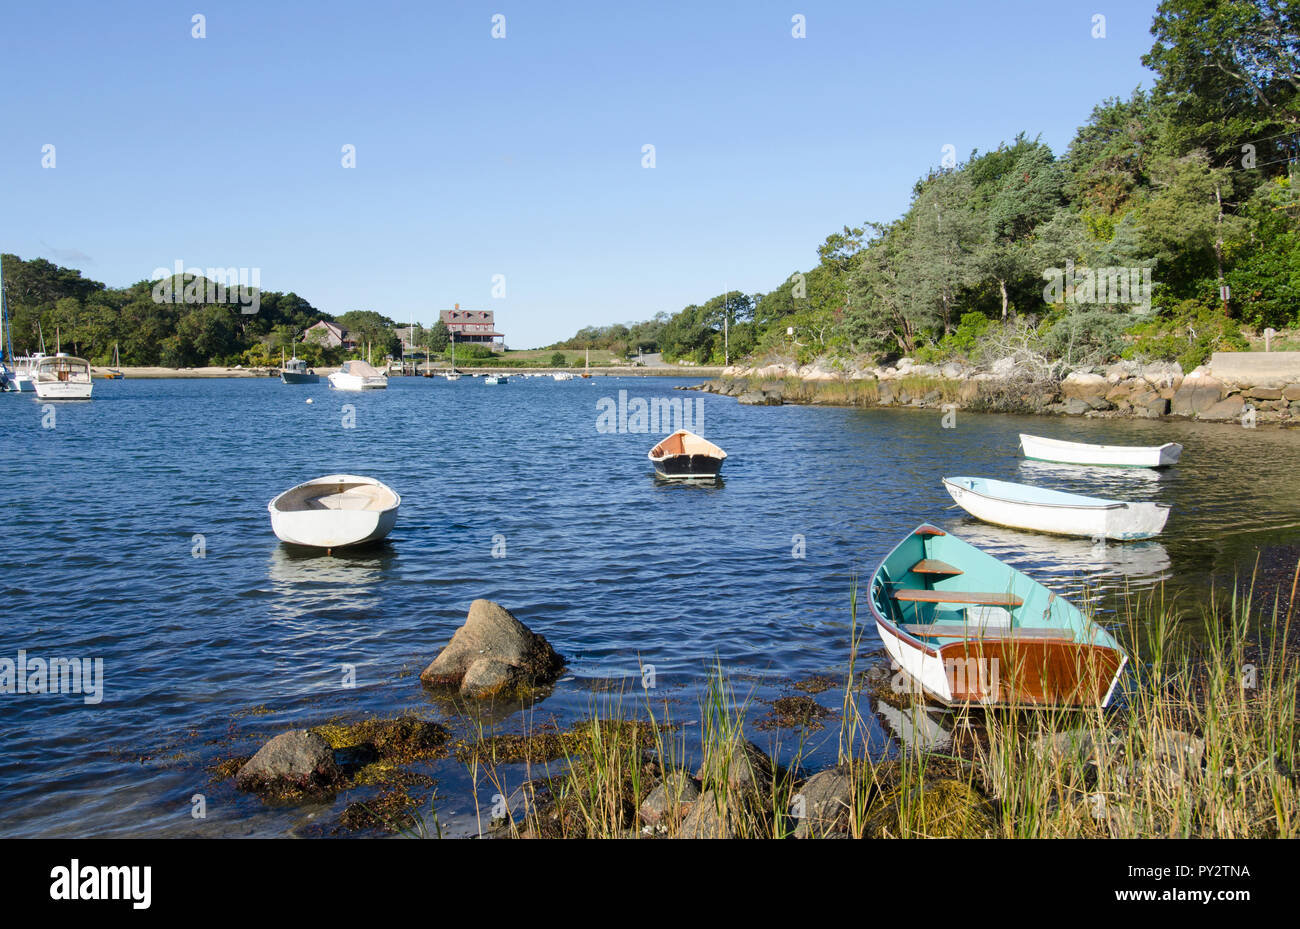 Quissett Harbor in Falmouth, Cape Cod, Massachusetts, USA with boats on moorings on a bright, sunny, blue sky morning Stock Photo